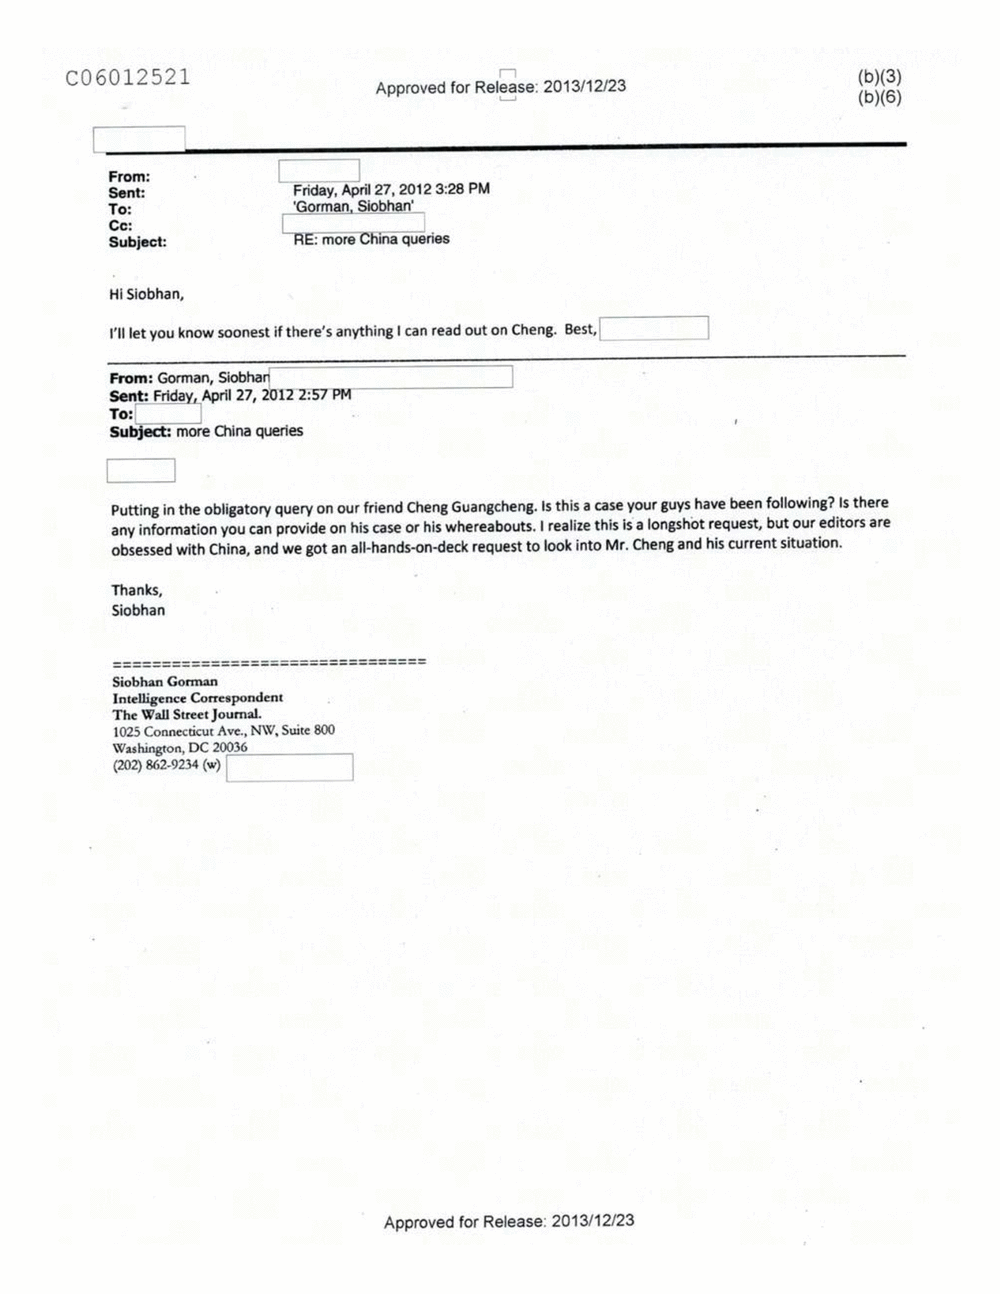 Page 42 from Email Correspondence Between Reporters and CIA Flacks